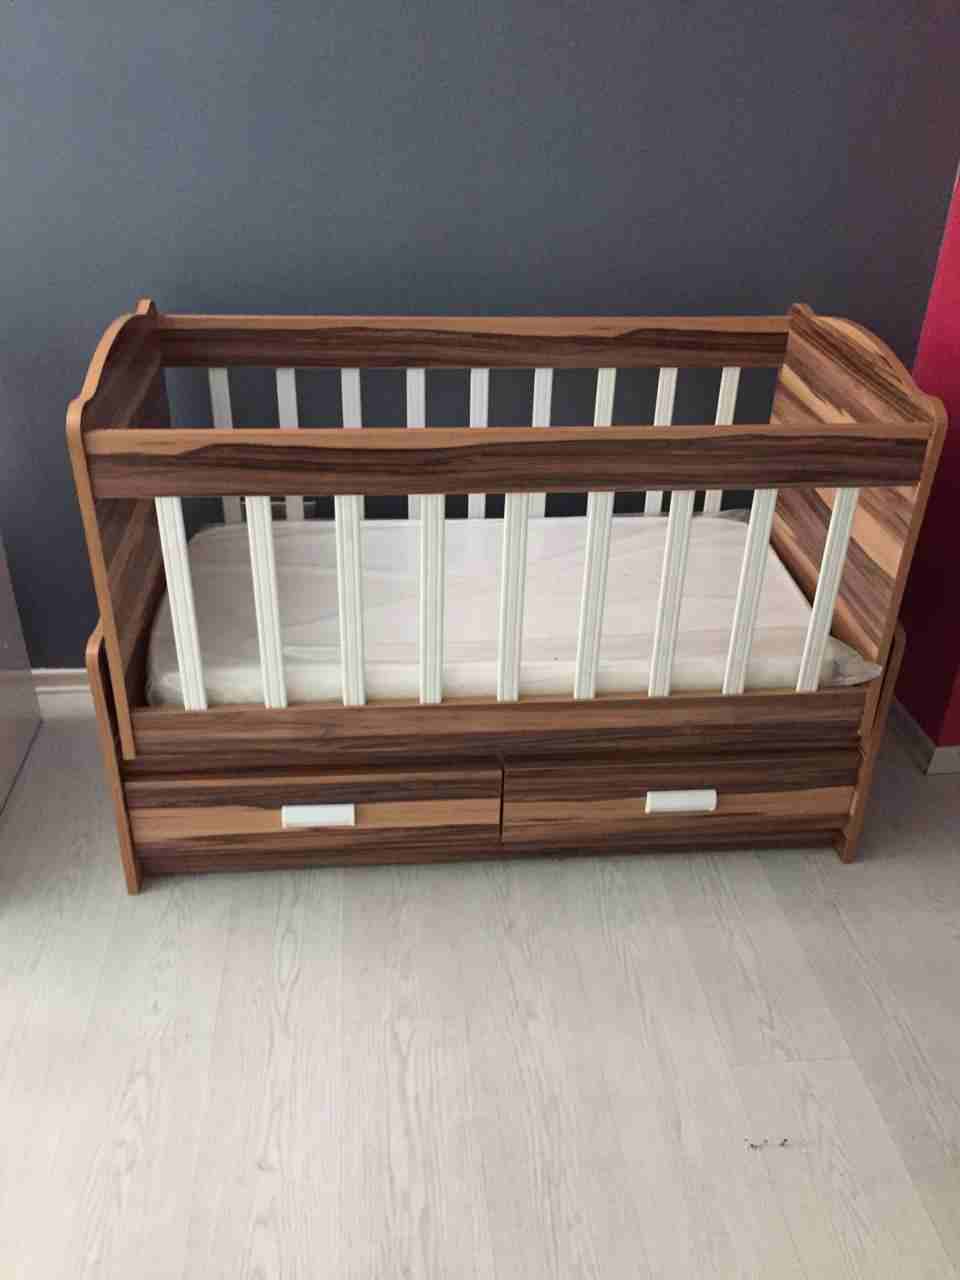 baby bed used few times onlyGood condition Used few times Baby bed Open for offer-  تخت بيبي اطفال لعمر 5...